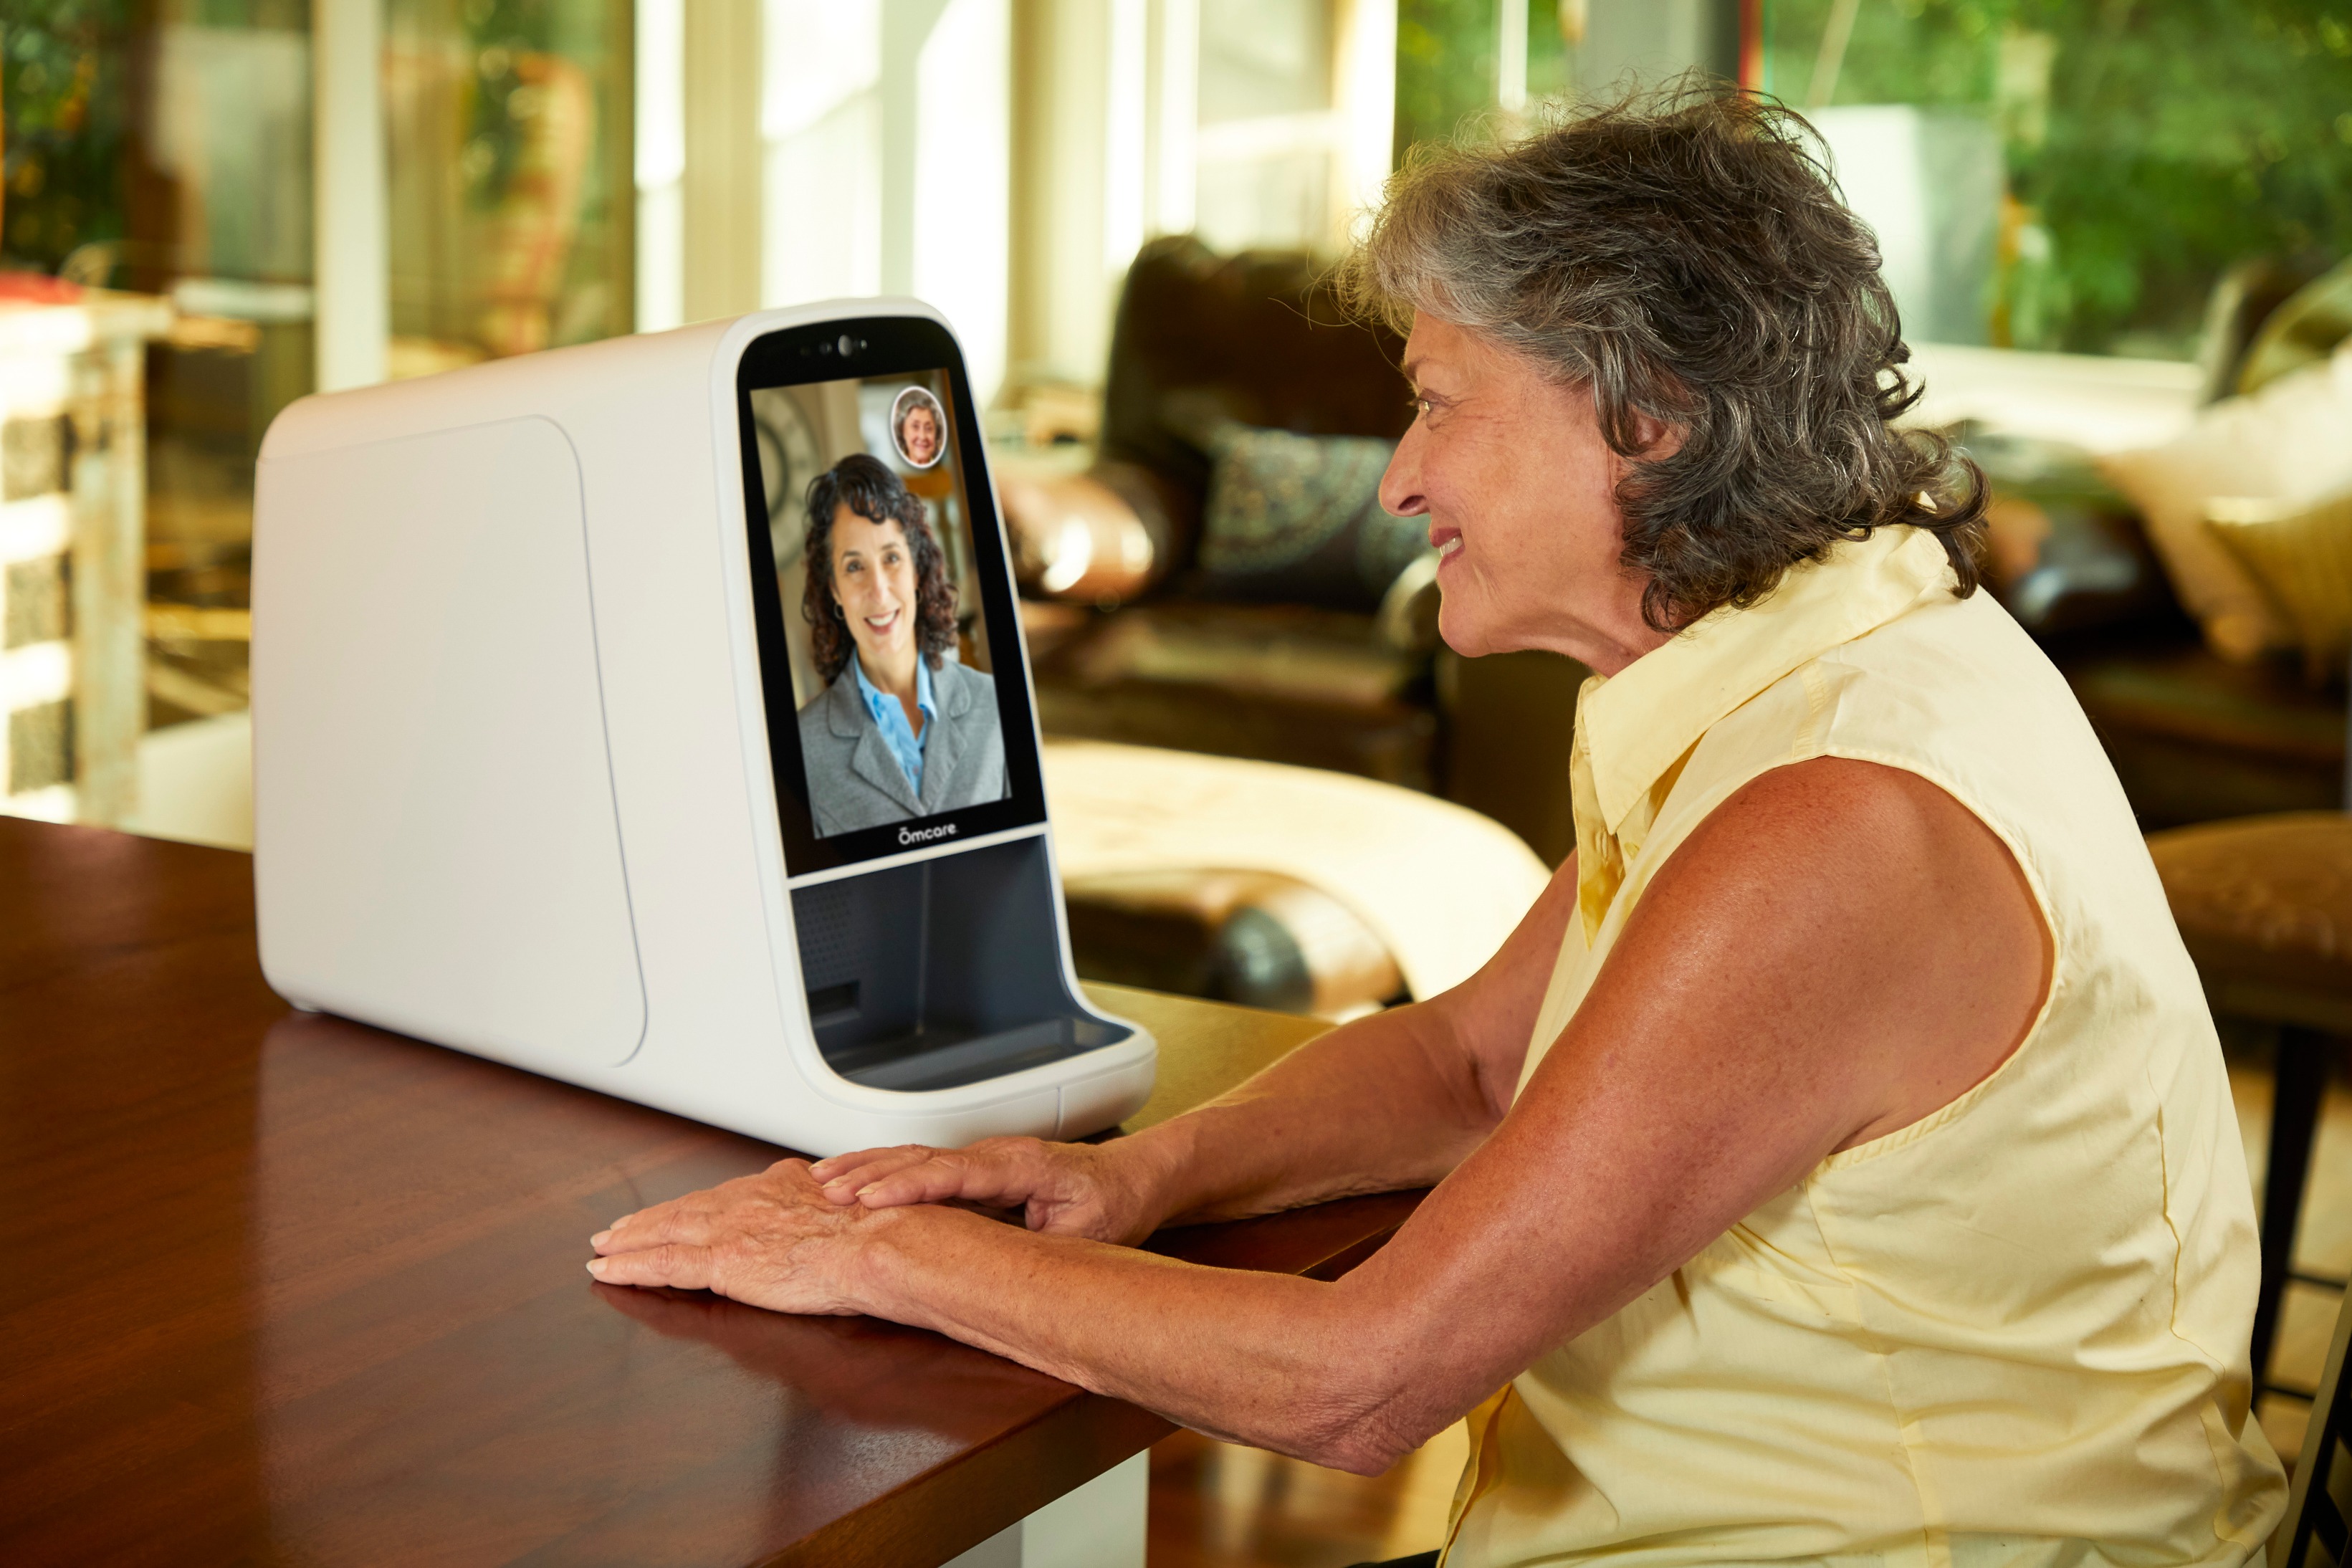 The Ōmcare® Telemed System is designed to improve medication adherence, reduce costs, and assist caregivers.